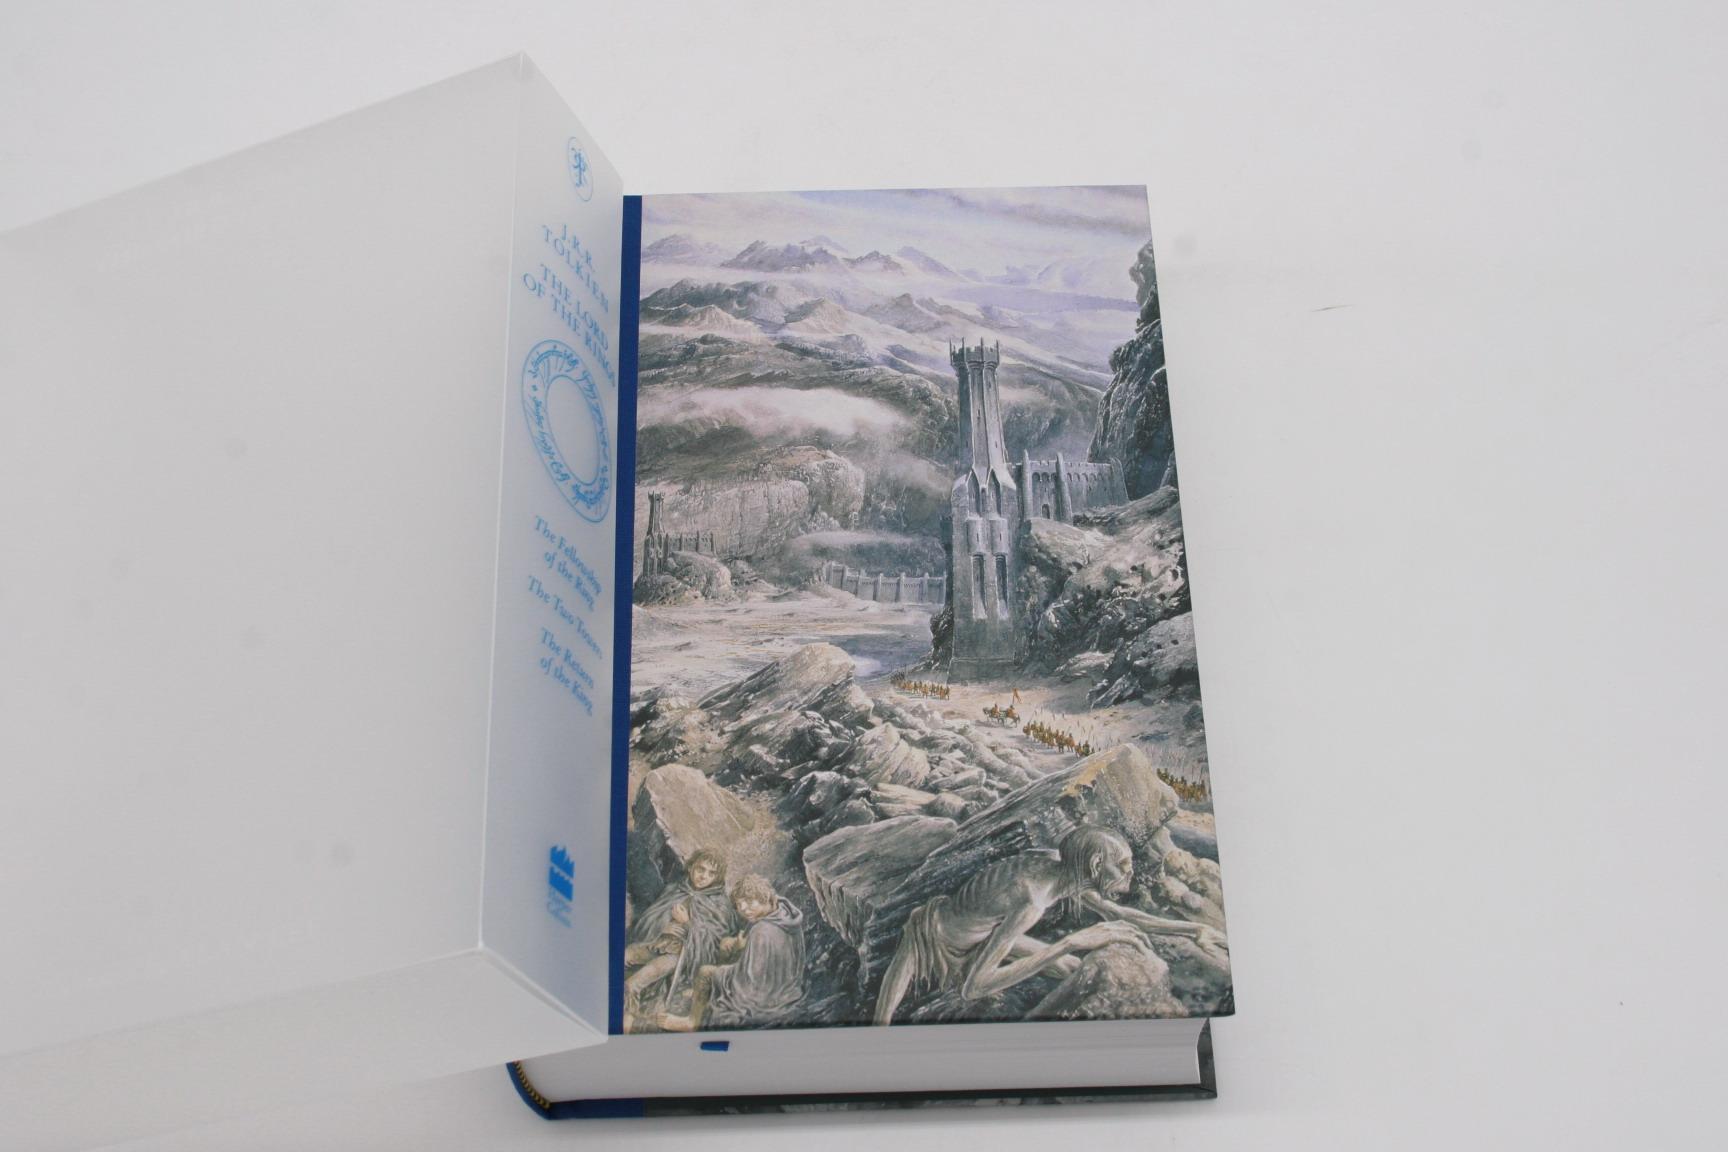 Book - The Lord of The Rings Illustrated Slipcased Edition by J.R.R. Tolkien